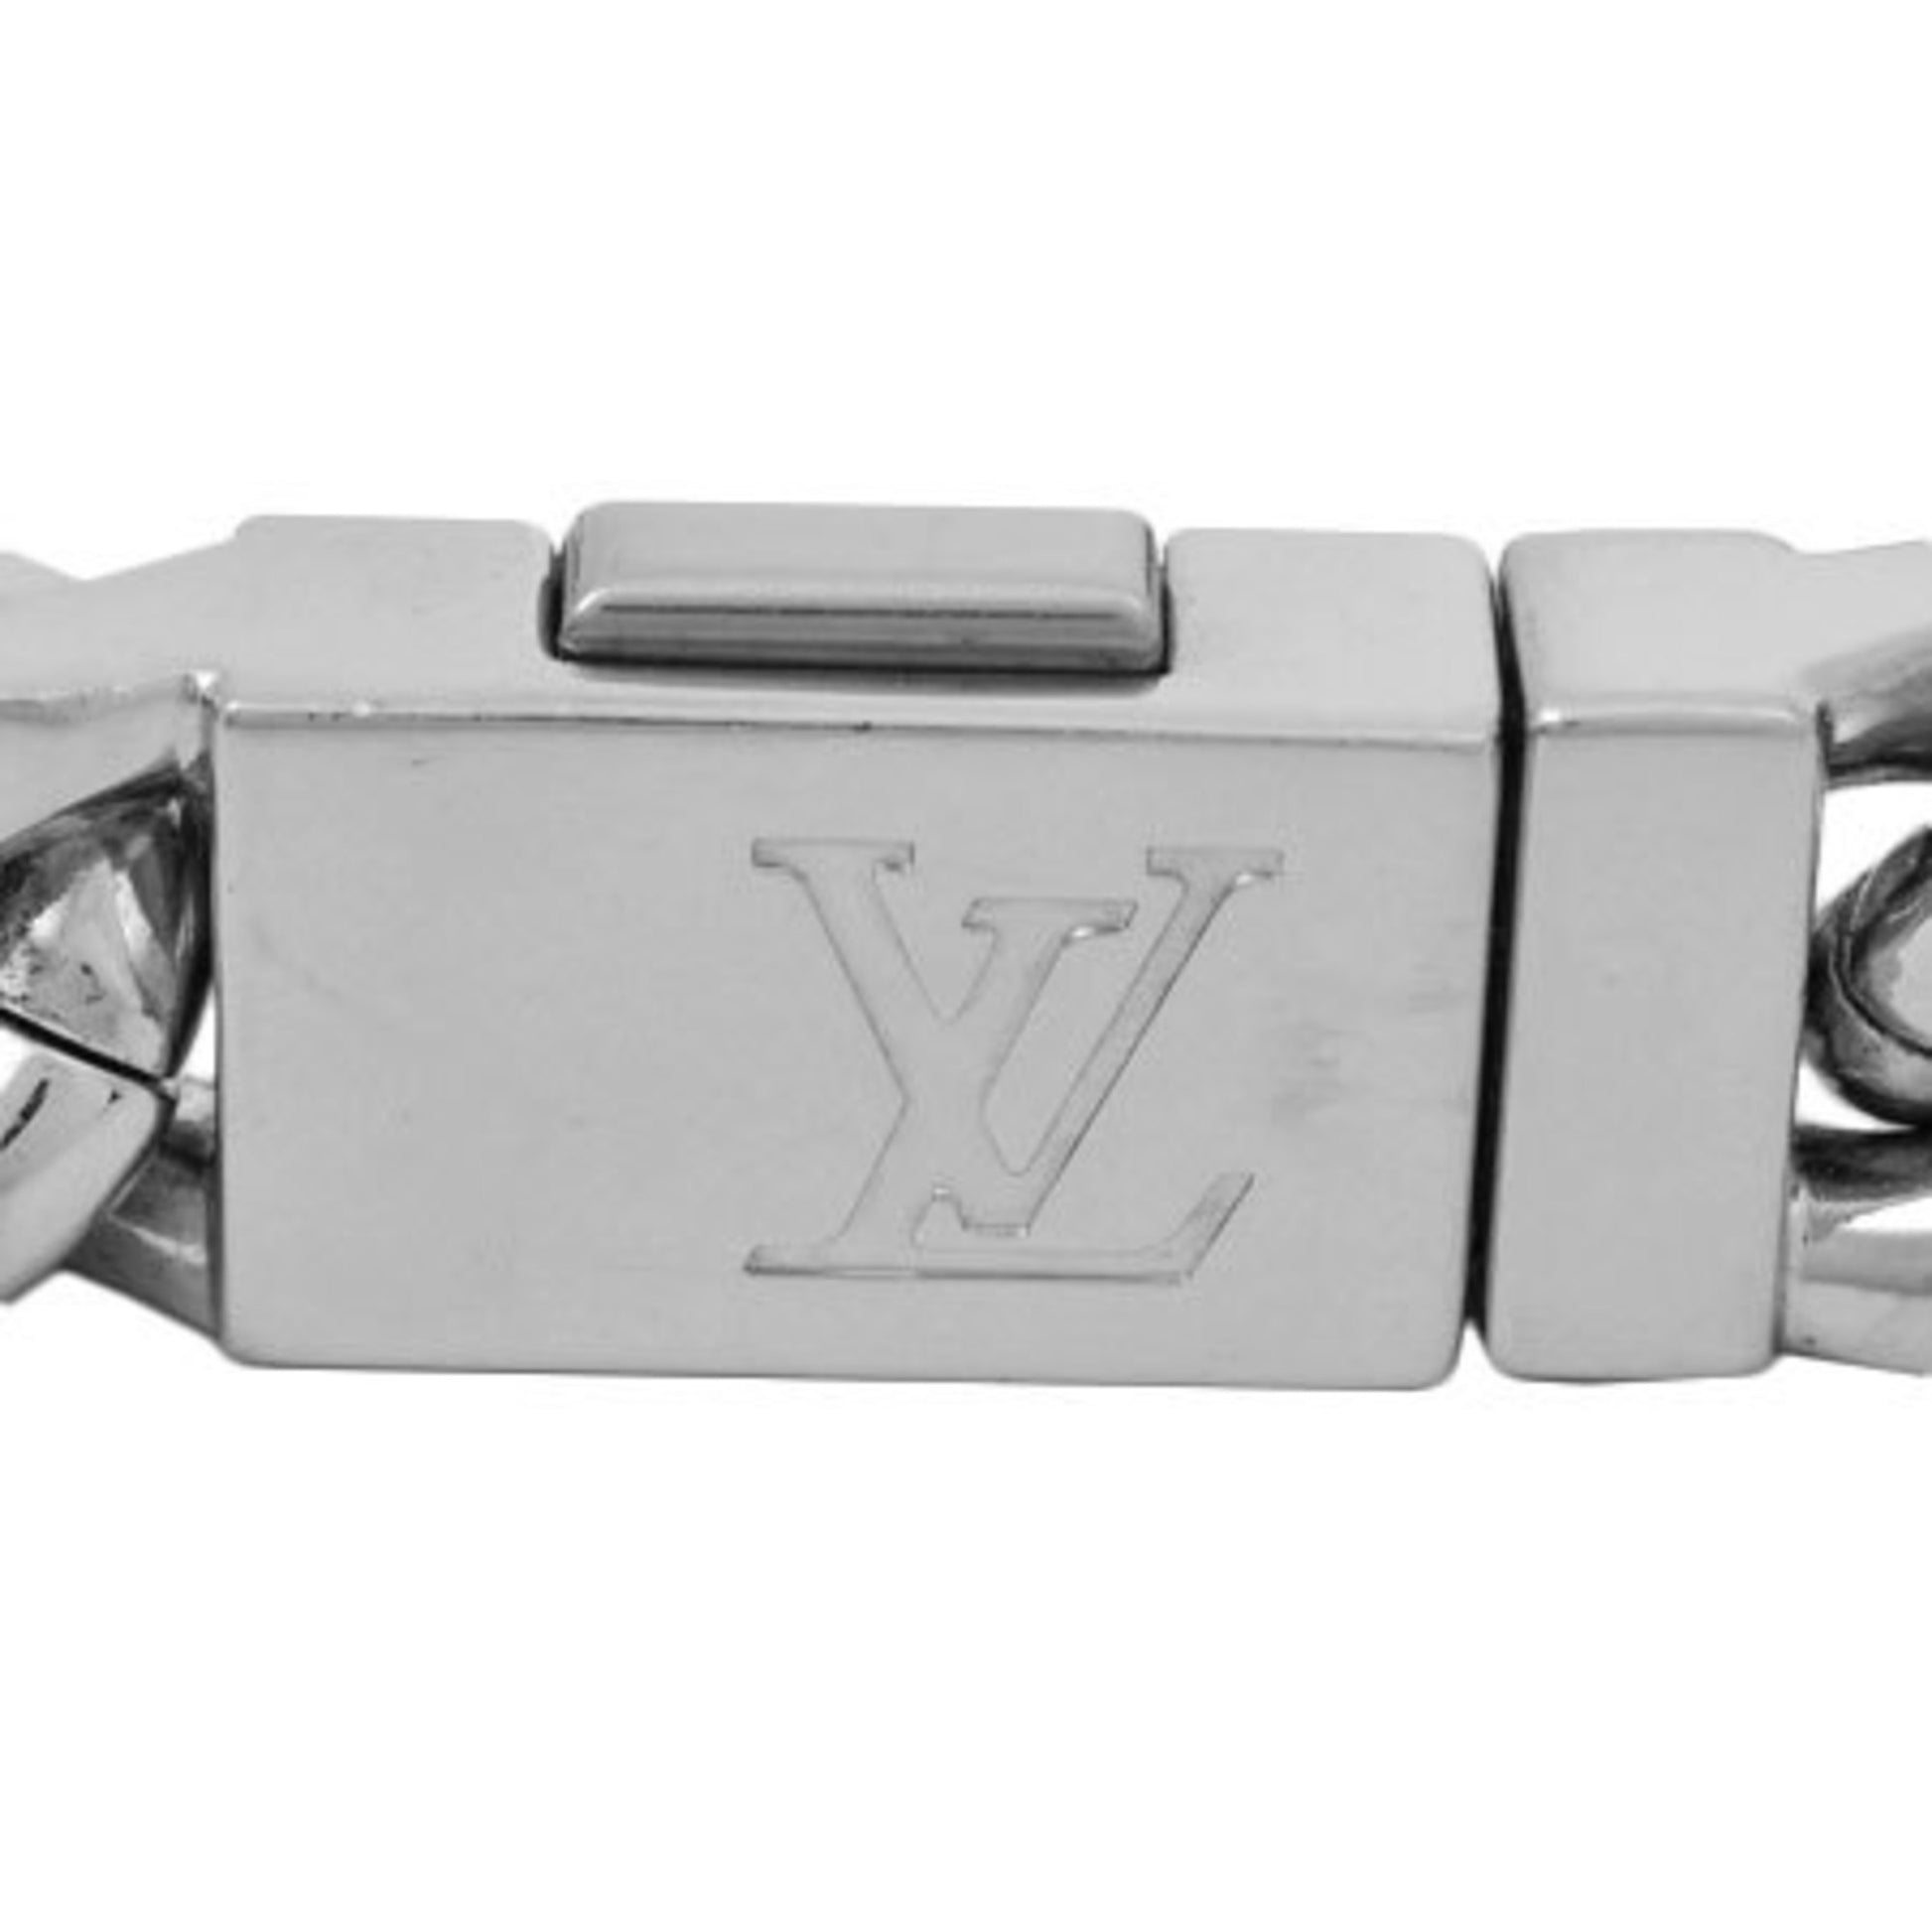 Buy [Used] LOUIS VUITTON Chain Bracelet Monogram Plated Silver M00269 from  Japan - Buy authentic Plus exclusive items from Japan